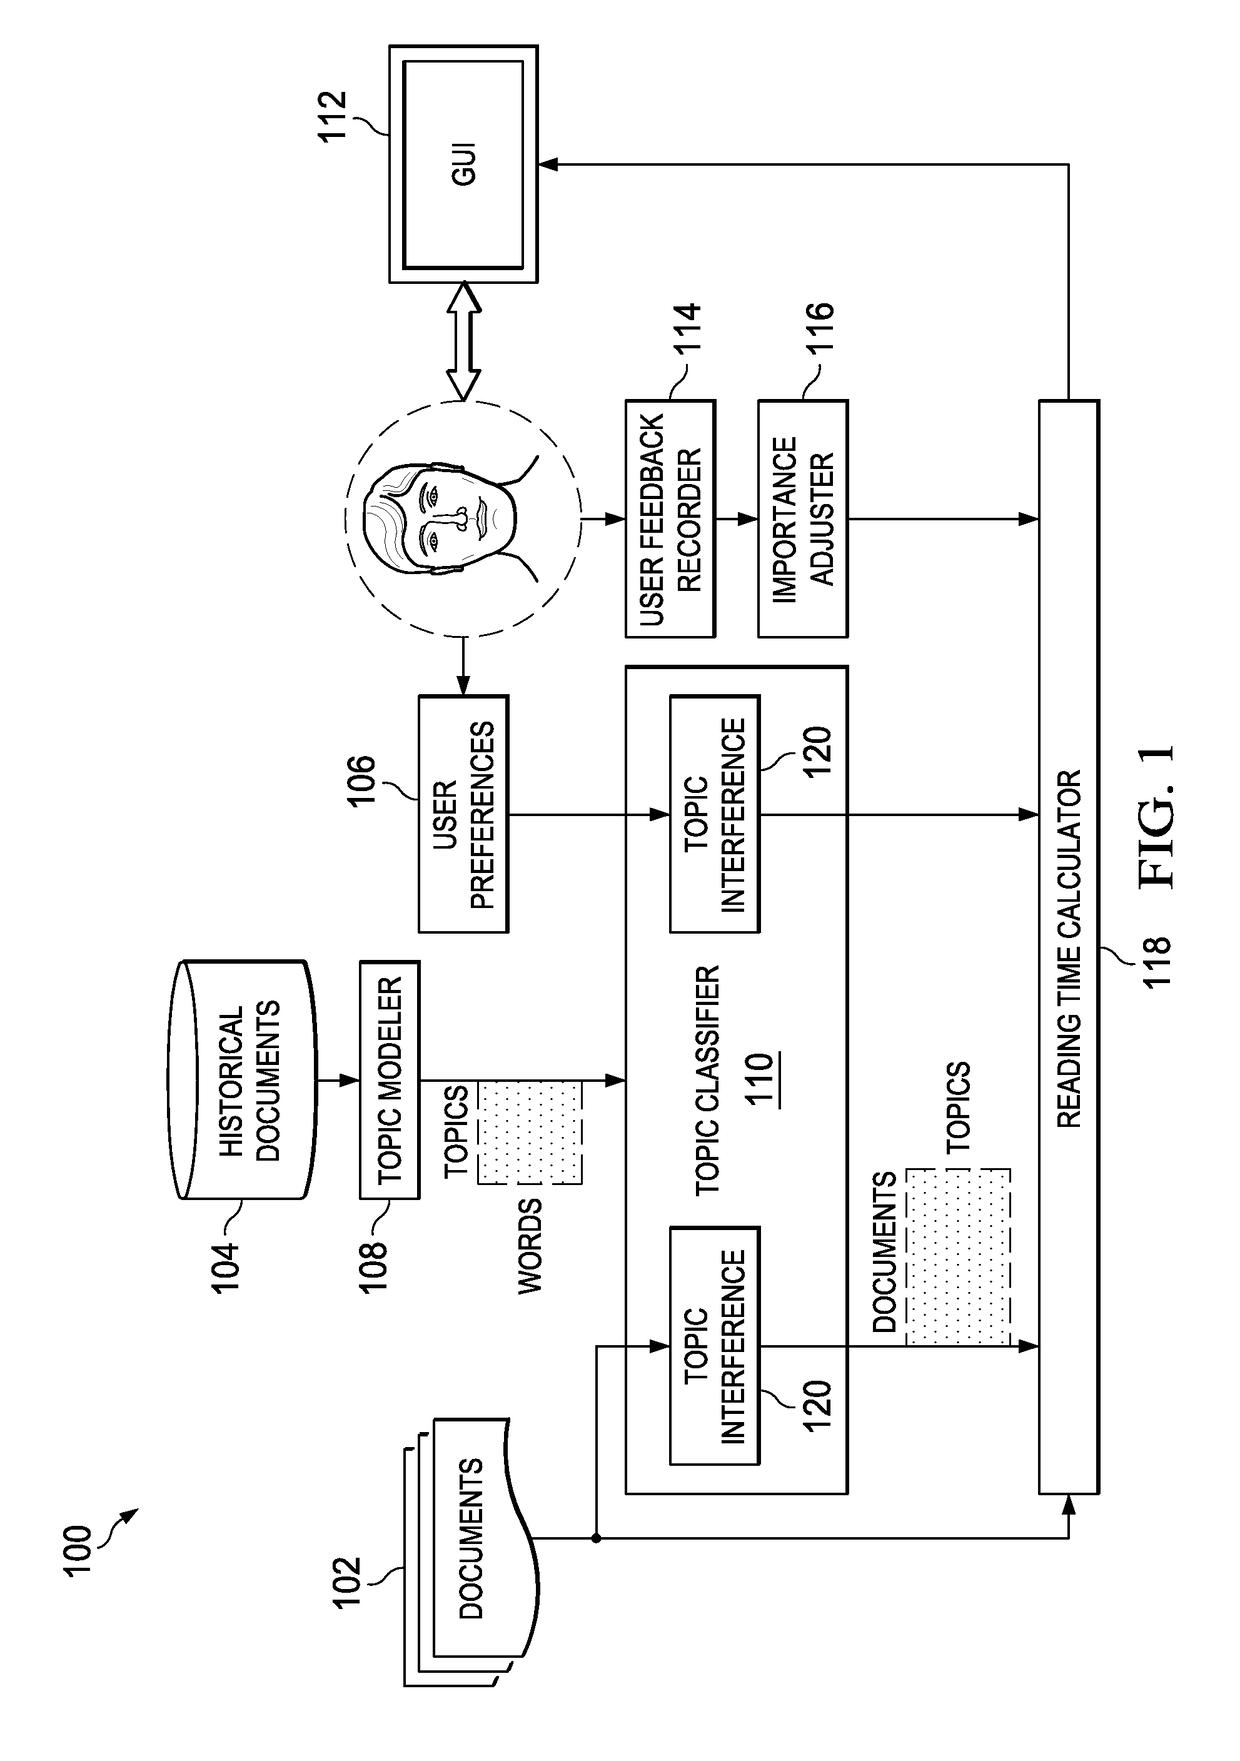 Managing a display of content based on user interaction topic and topic vectors